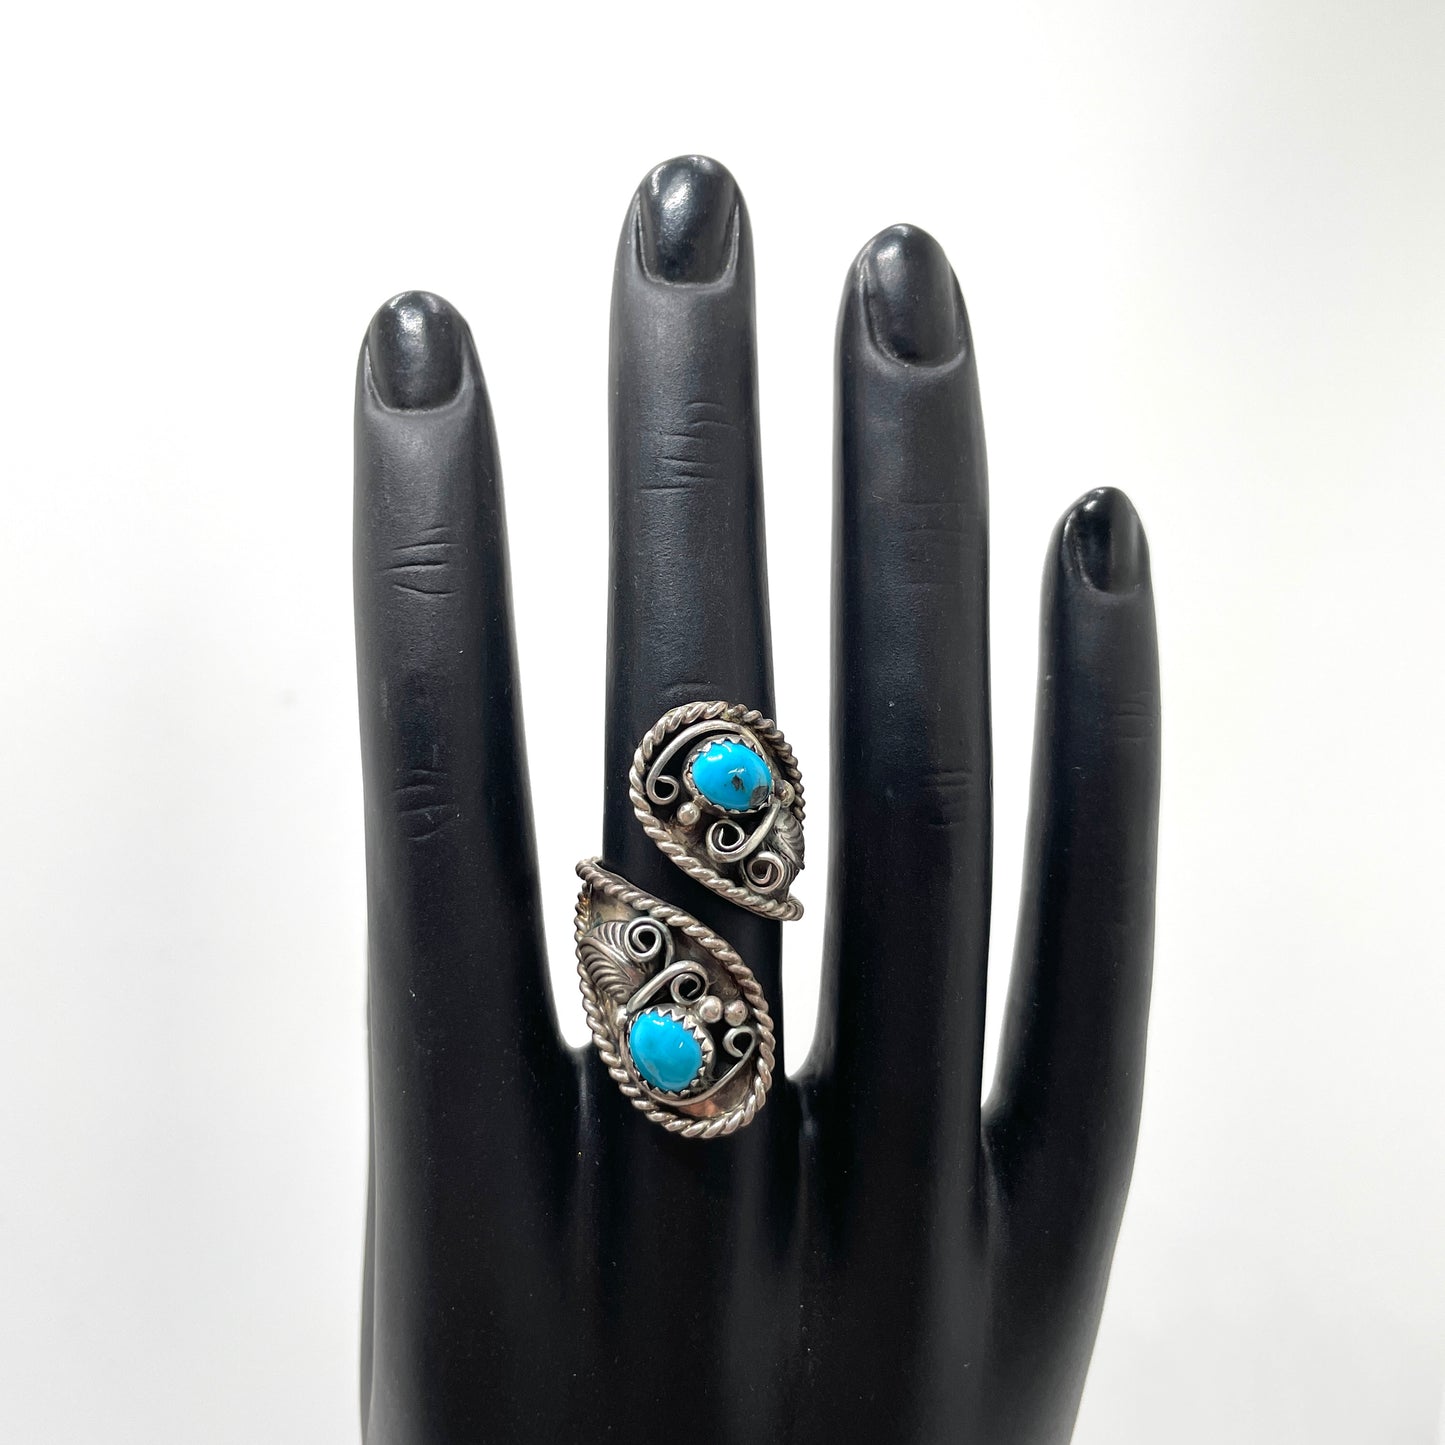 Sterling Silver & Turquoise Wrap Ring - Size 6.5